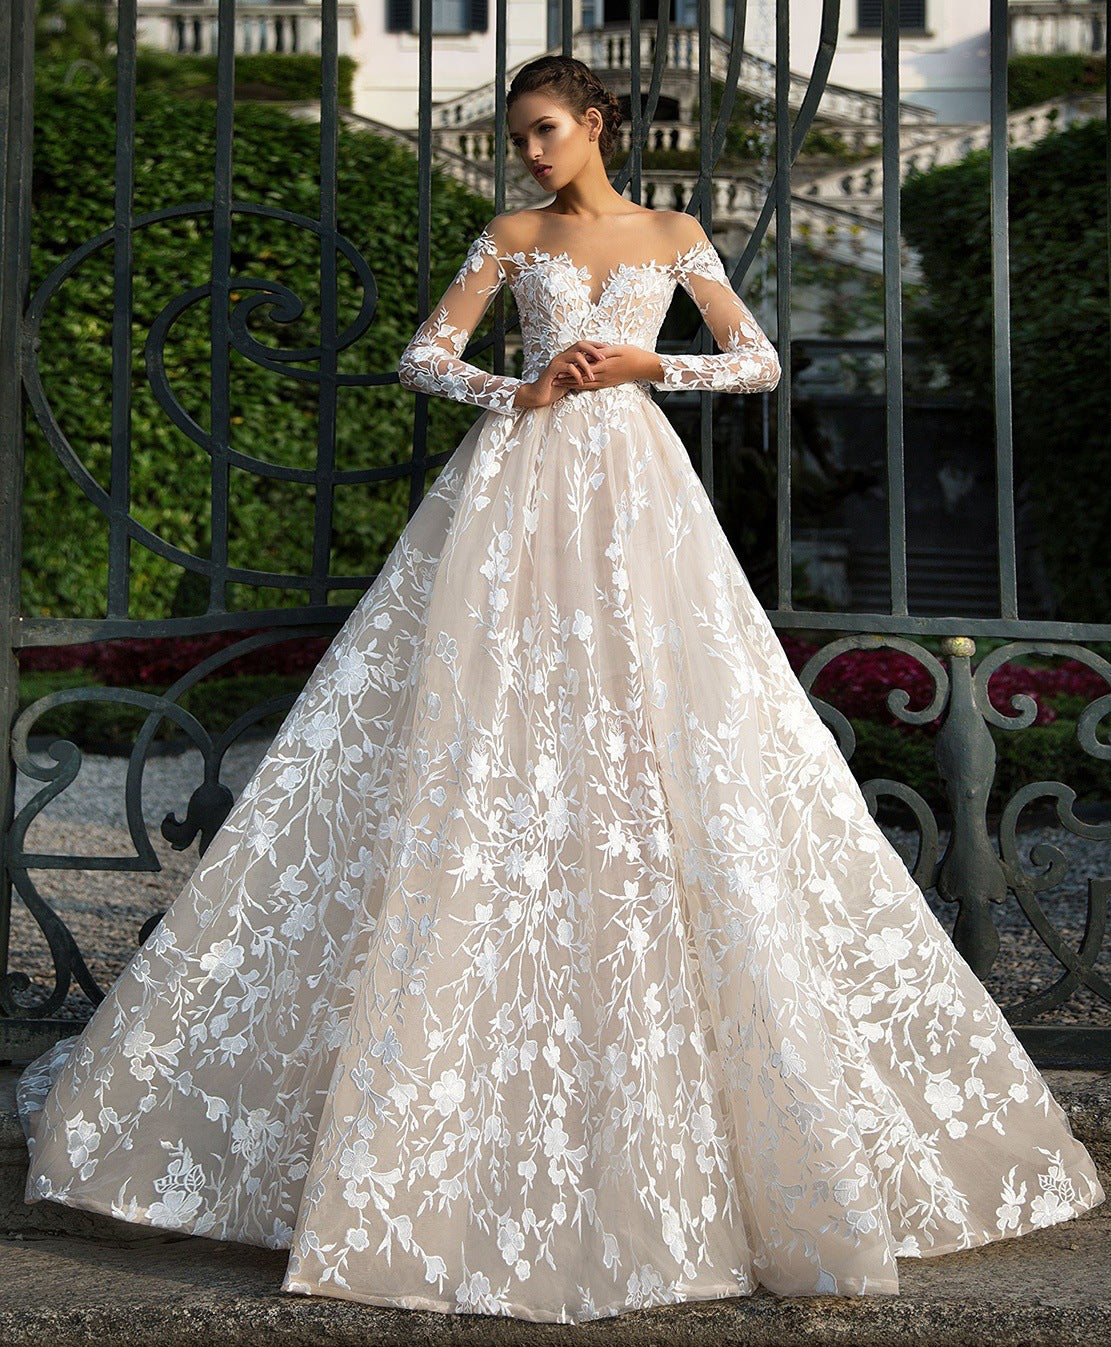 Lace Wedding Dress Sweetheart Neck Long Sleeves Appliques